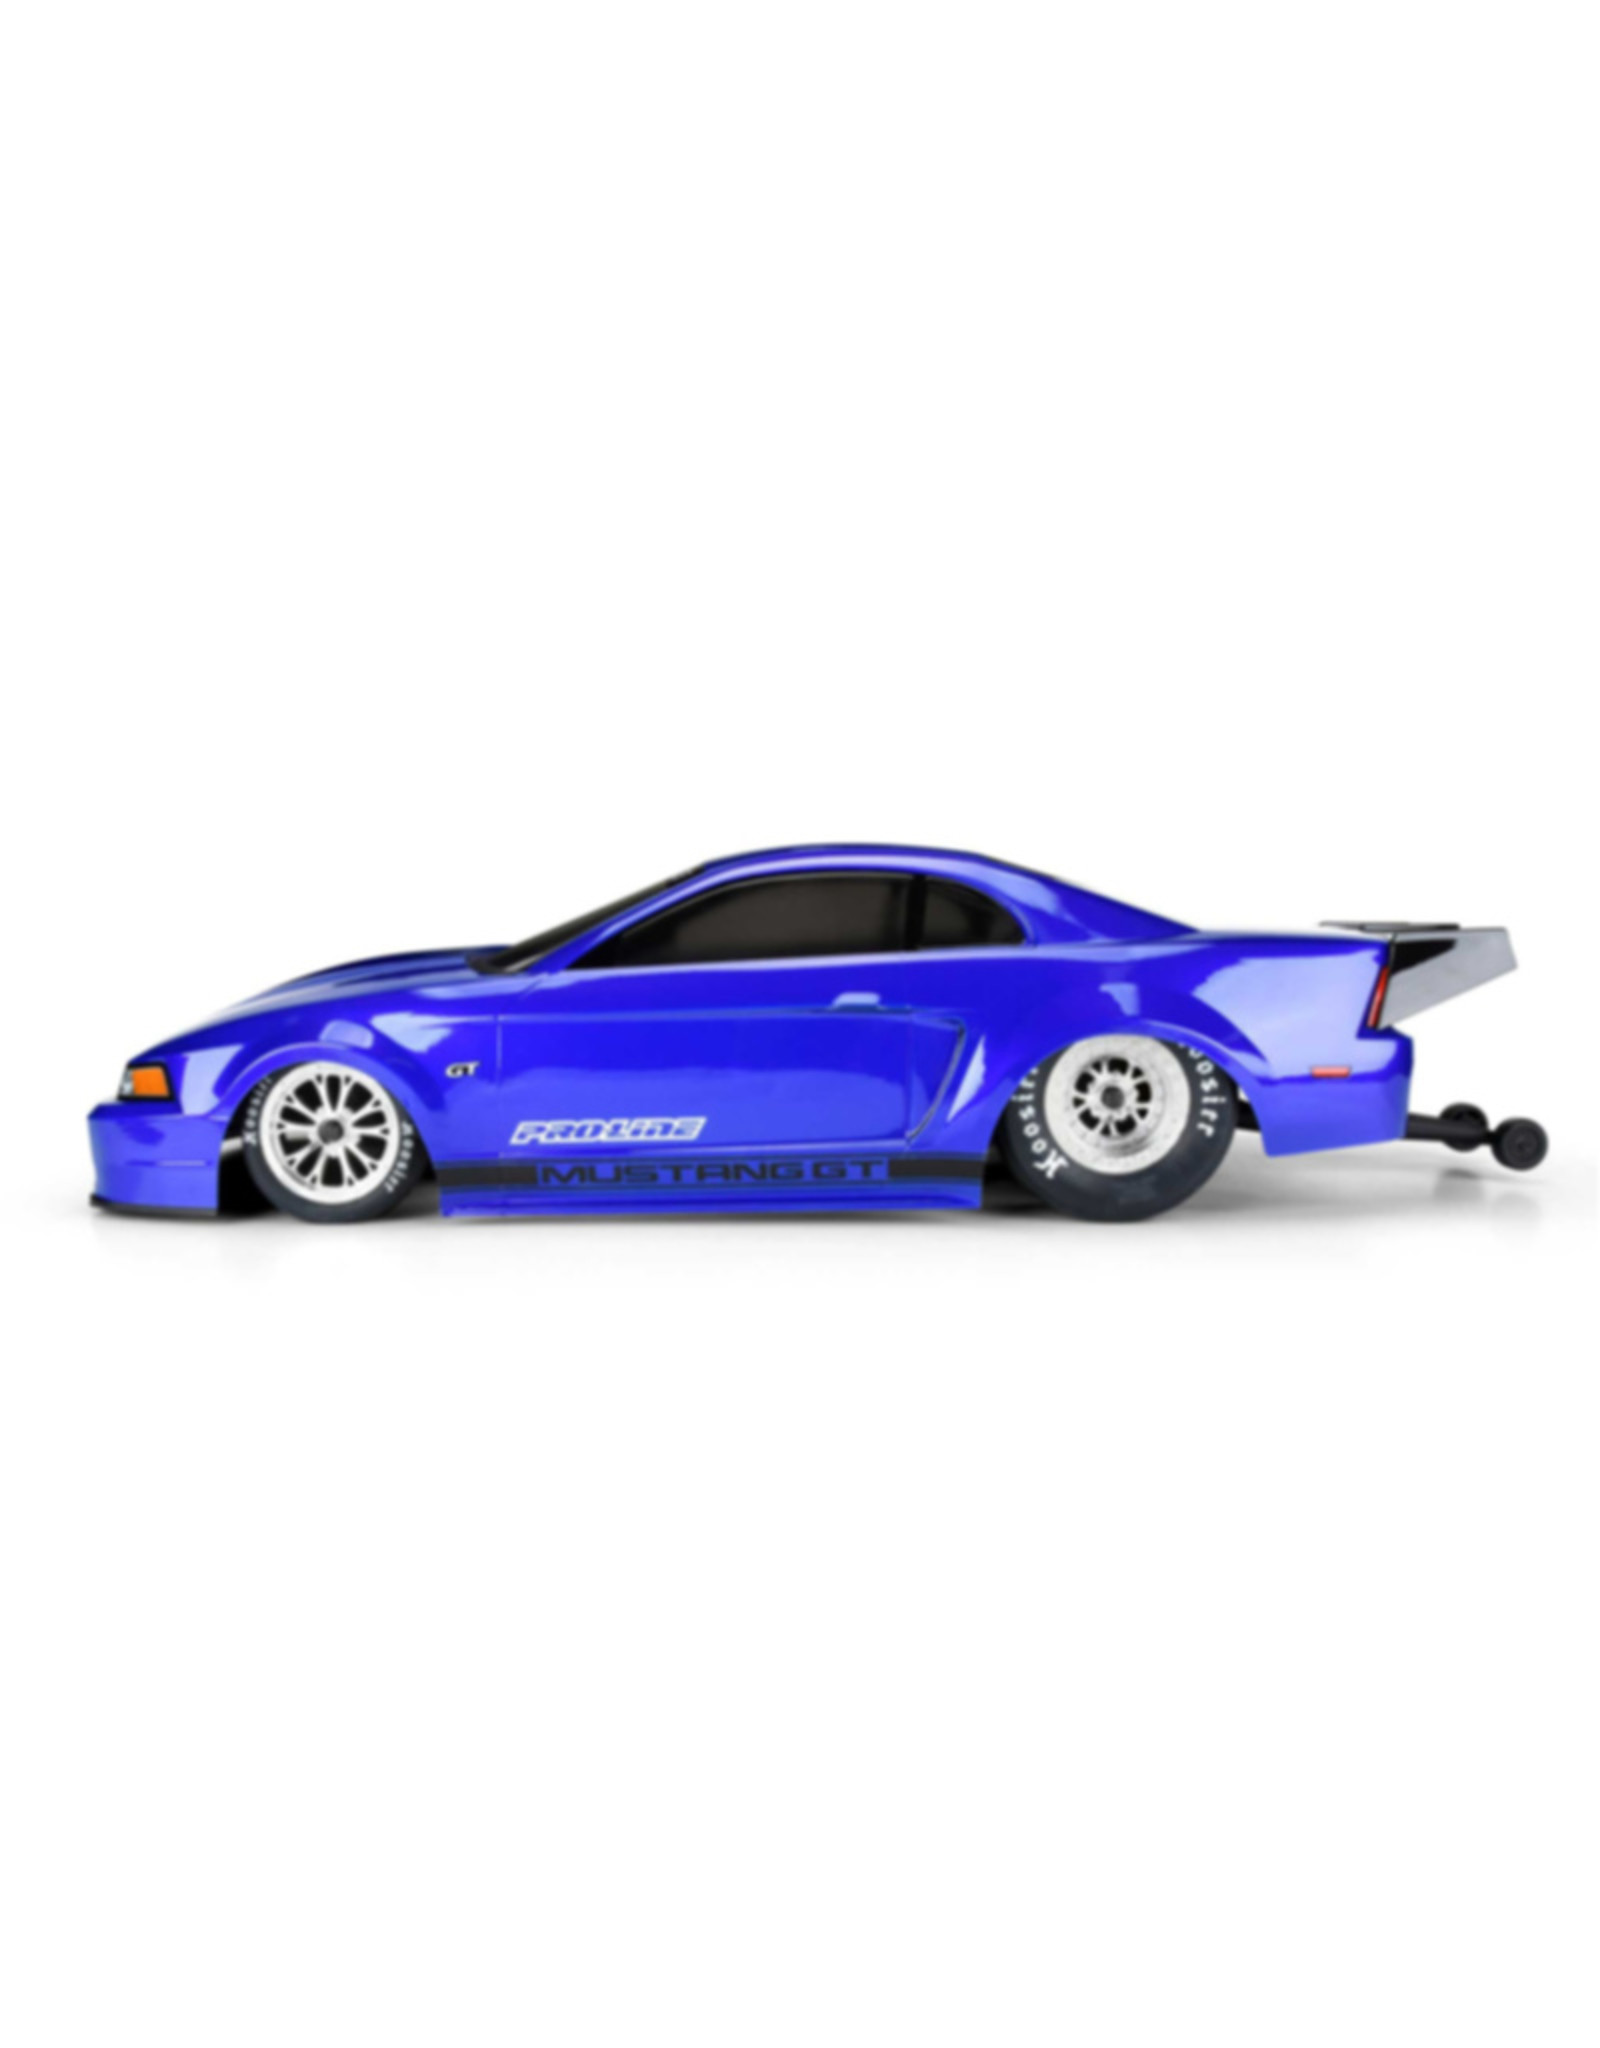 Pro-Line Racing PRO357900 1/10 1999 Ford Mustang Clr Bdy: Drag Car